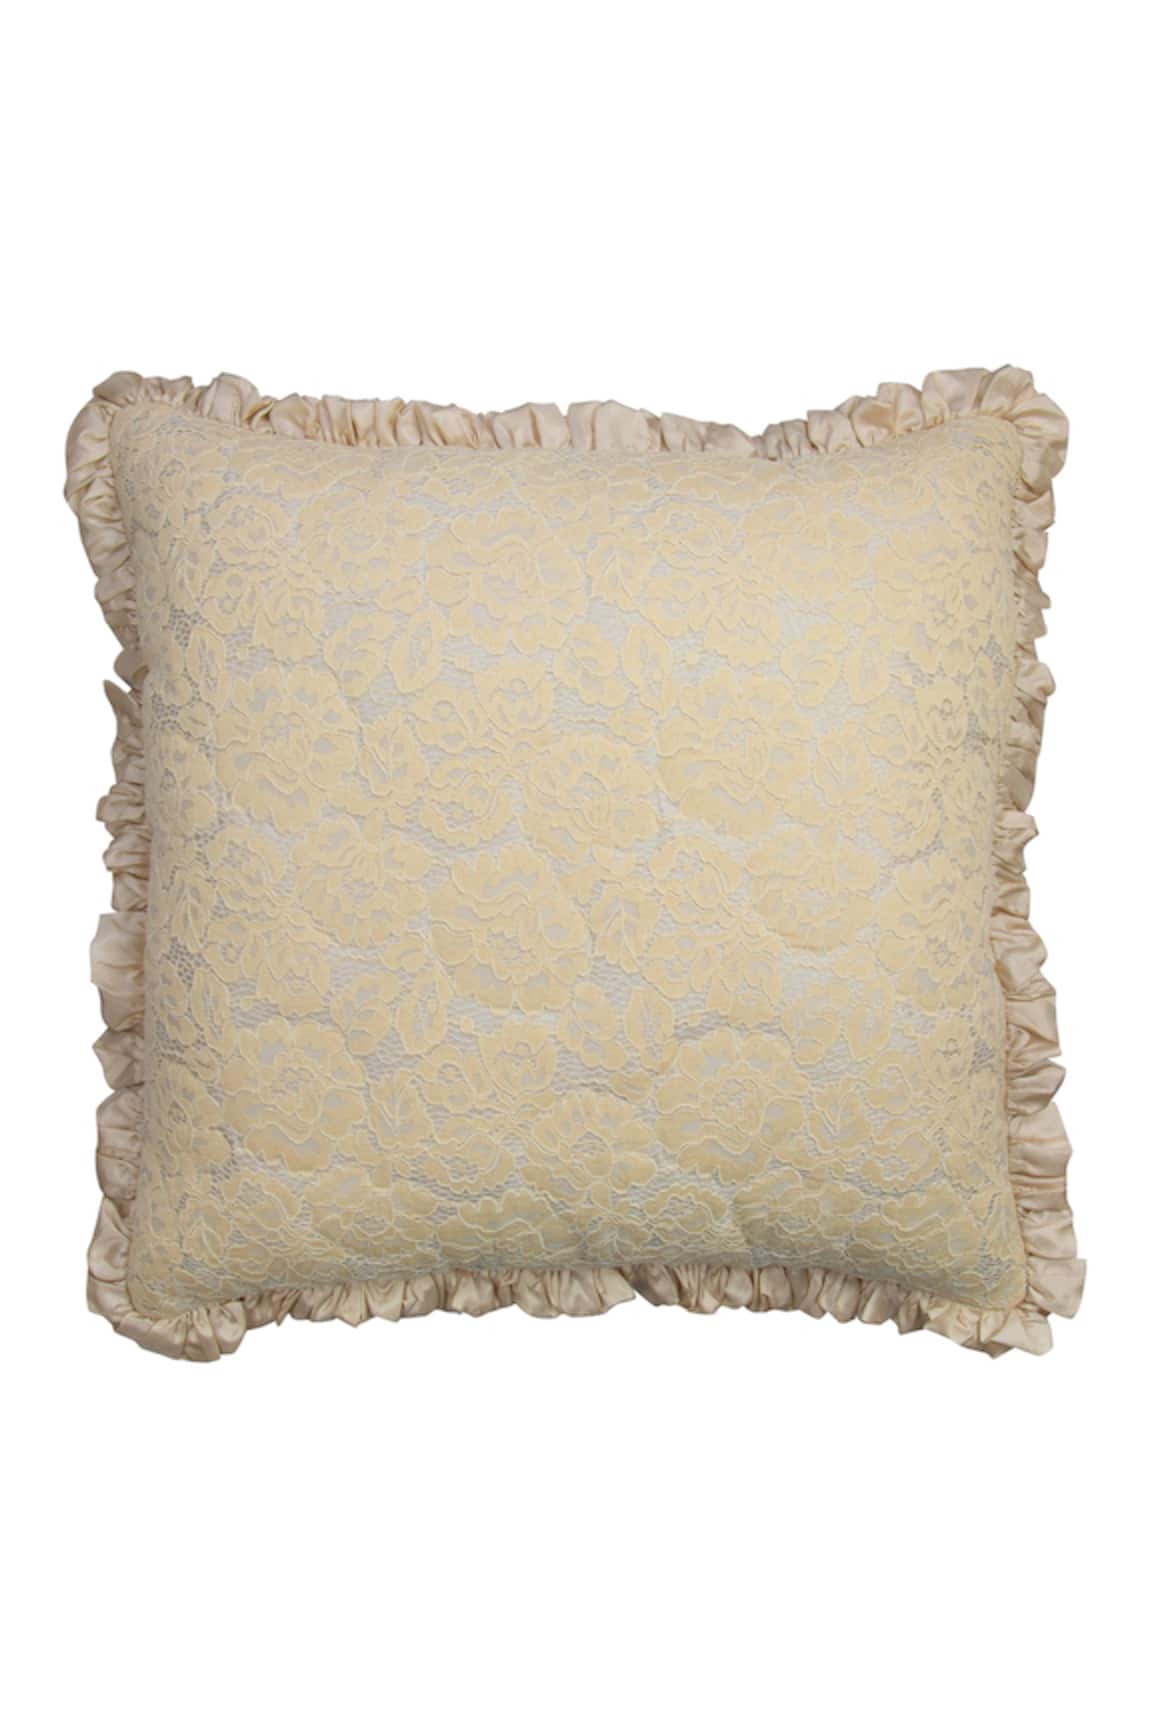 Diva Riche Flower Lace Embellished Cushion Cover